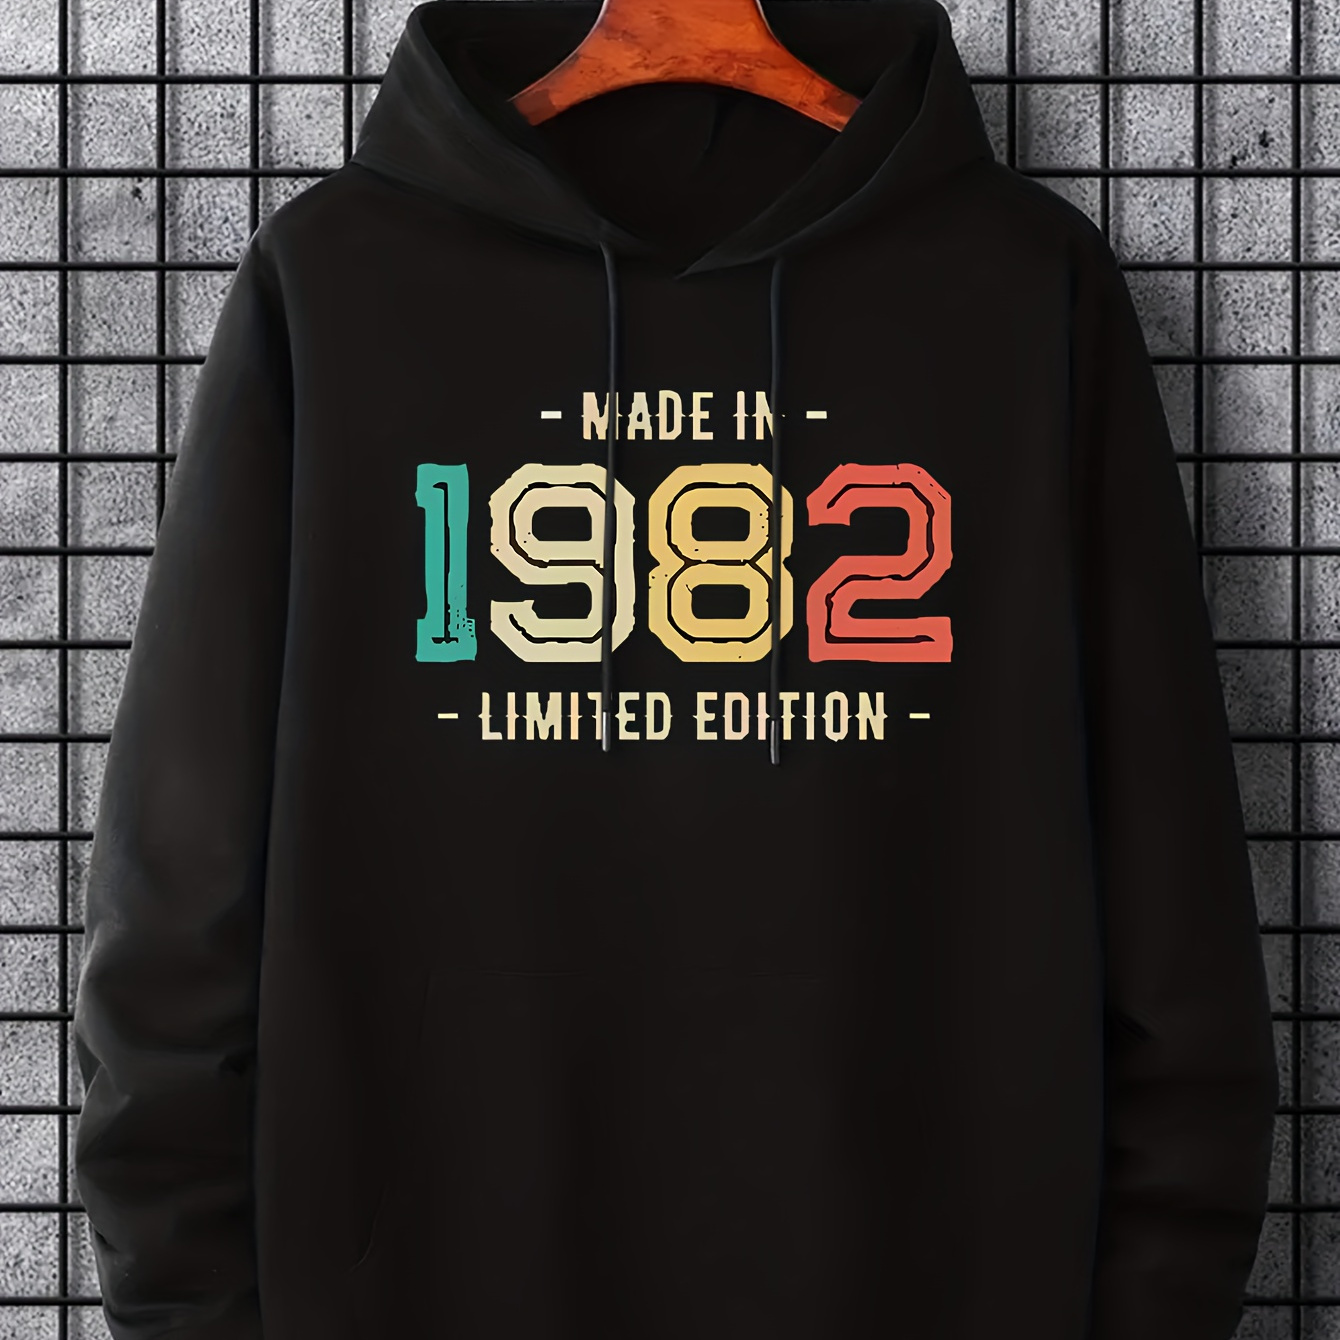 

Made In 1982 Letter Print, Hoodies For Men, Graphic Sweatshirt With Kangaroo Pocket, Comfy Trendy Hooded Pullover, Mens Clothing For Fall Winter